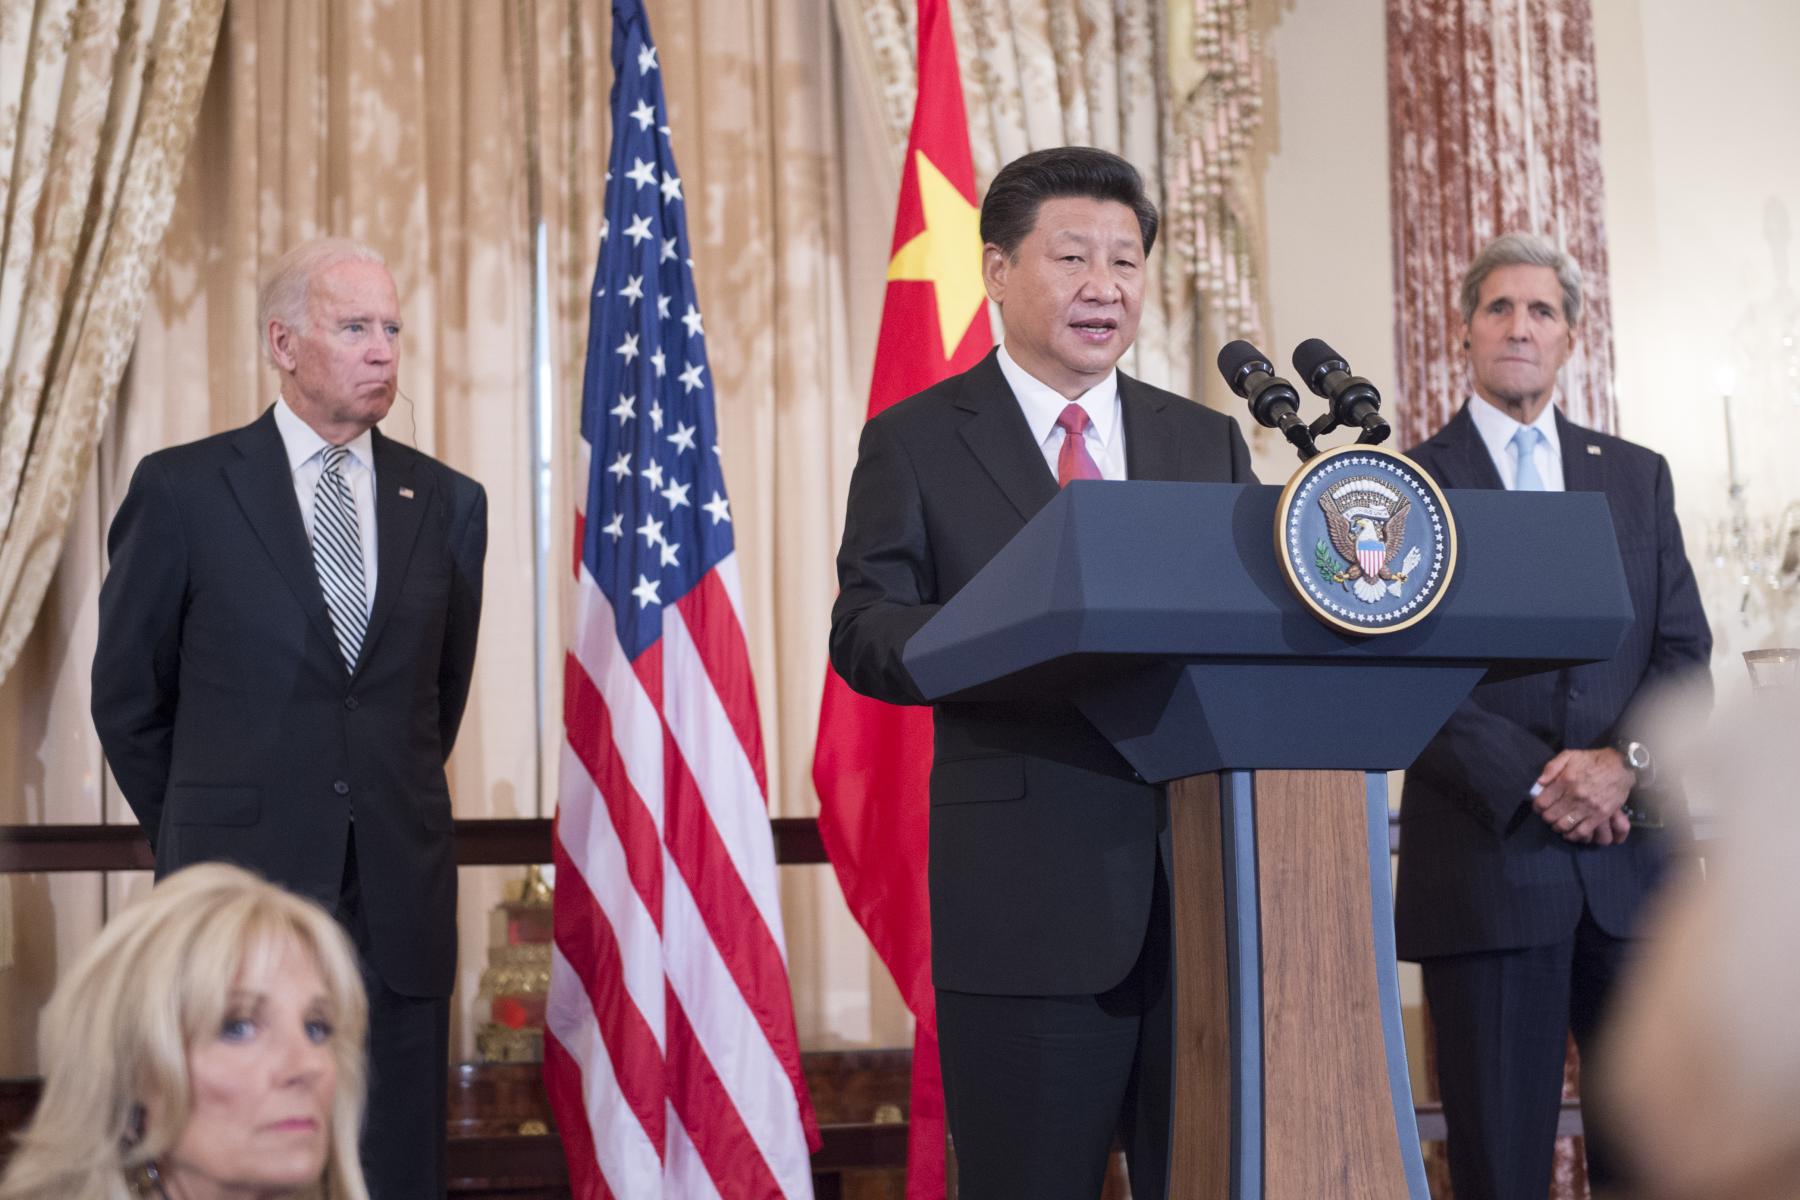 Chinese_President_Xi_Delivers_Remarks_at_a_State_Luncheon_in_His_Honor_at_the_State_Department-U.S. Department of State from United States, Public domain Wikimedia Commons.jpg